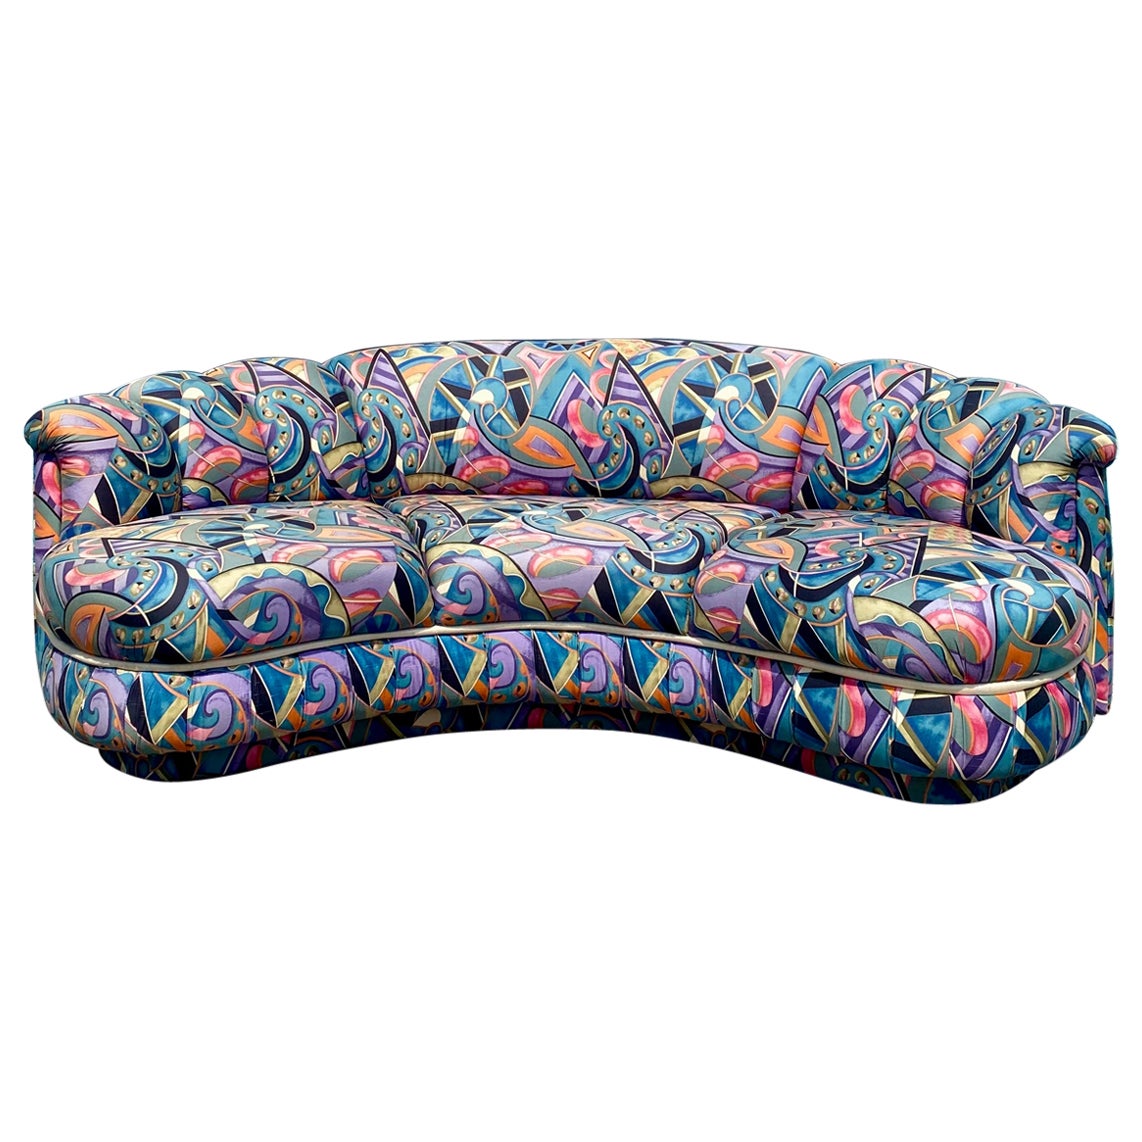 1980s Weiman Pucci Style Curved Tufted Channel Biomorphic Kidney Sofa For Sale